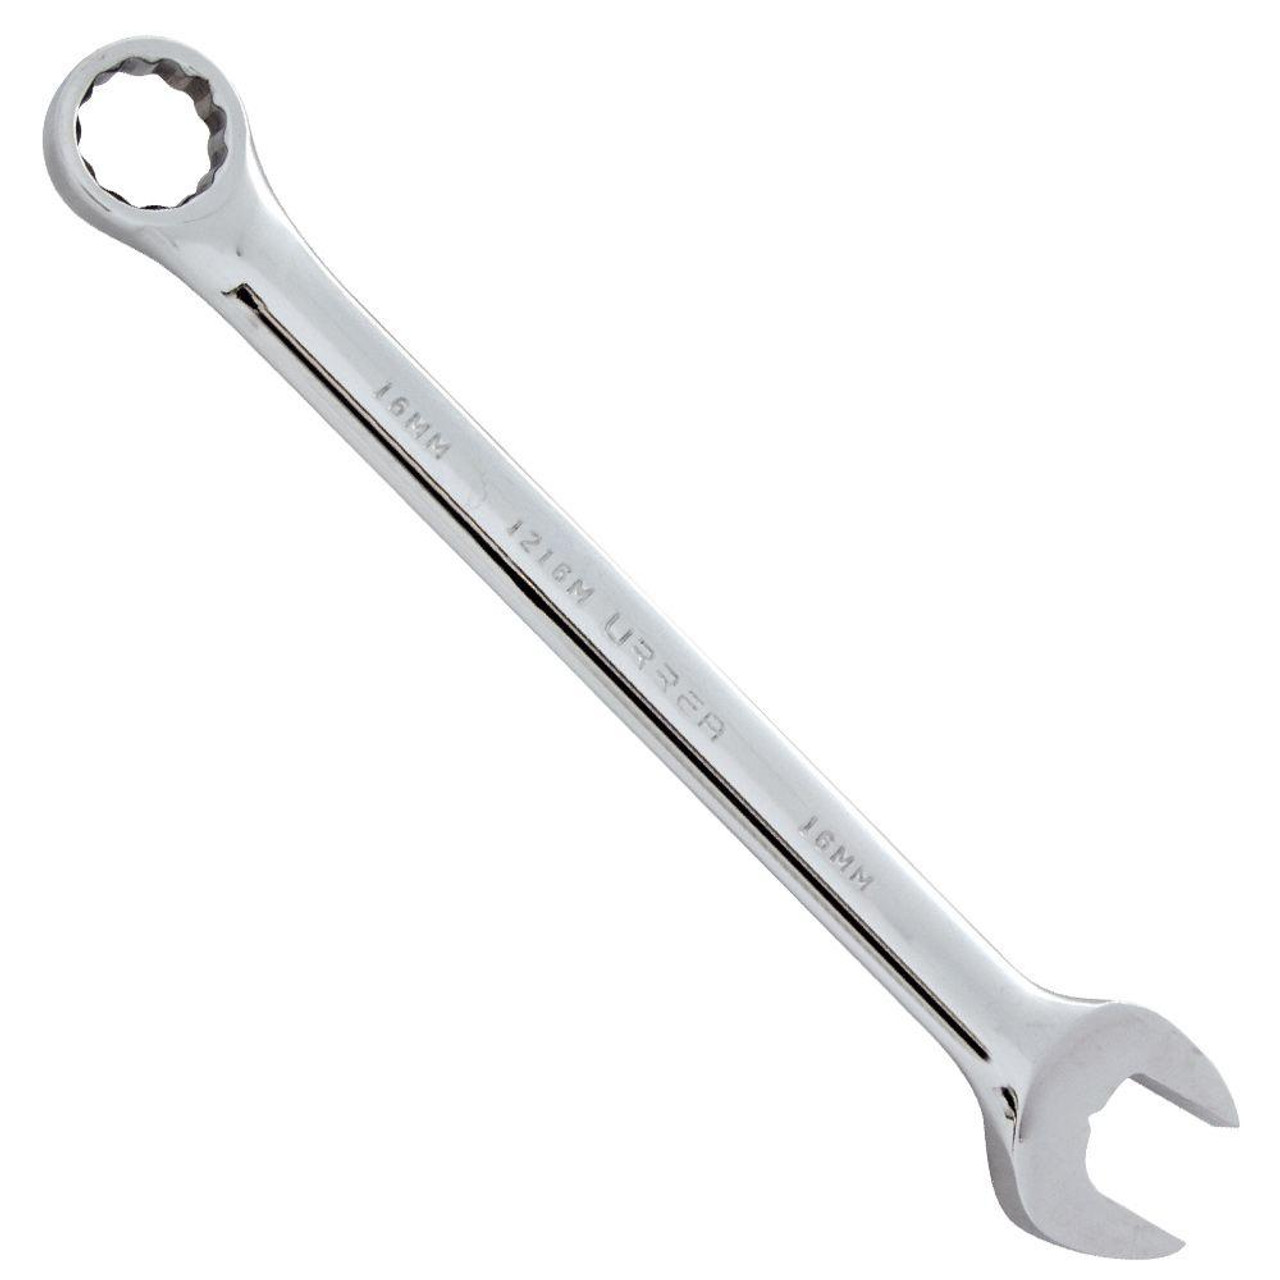 Satin finish combination wrench, Size: 8 mm, 12 point, Tool Length: 5-1/2"